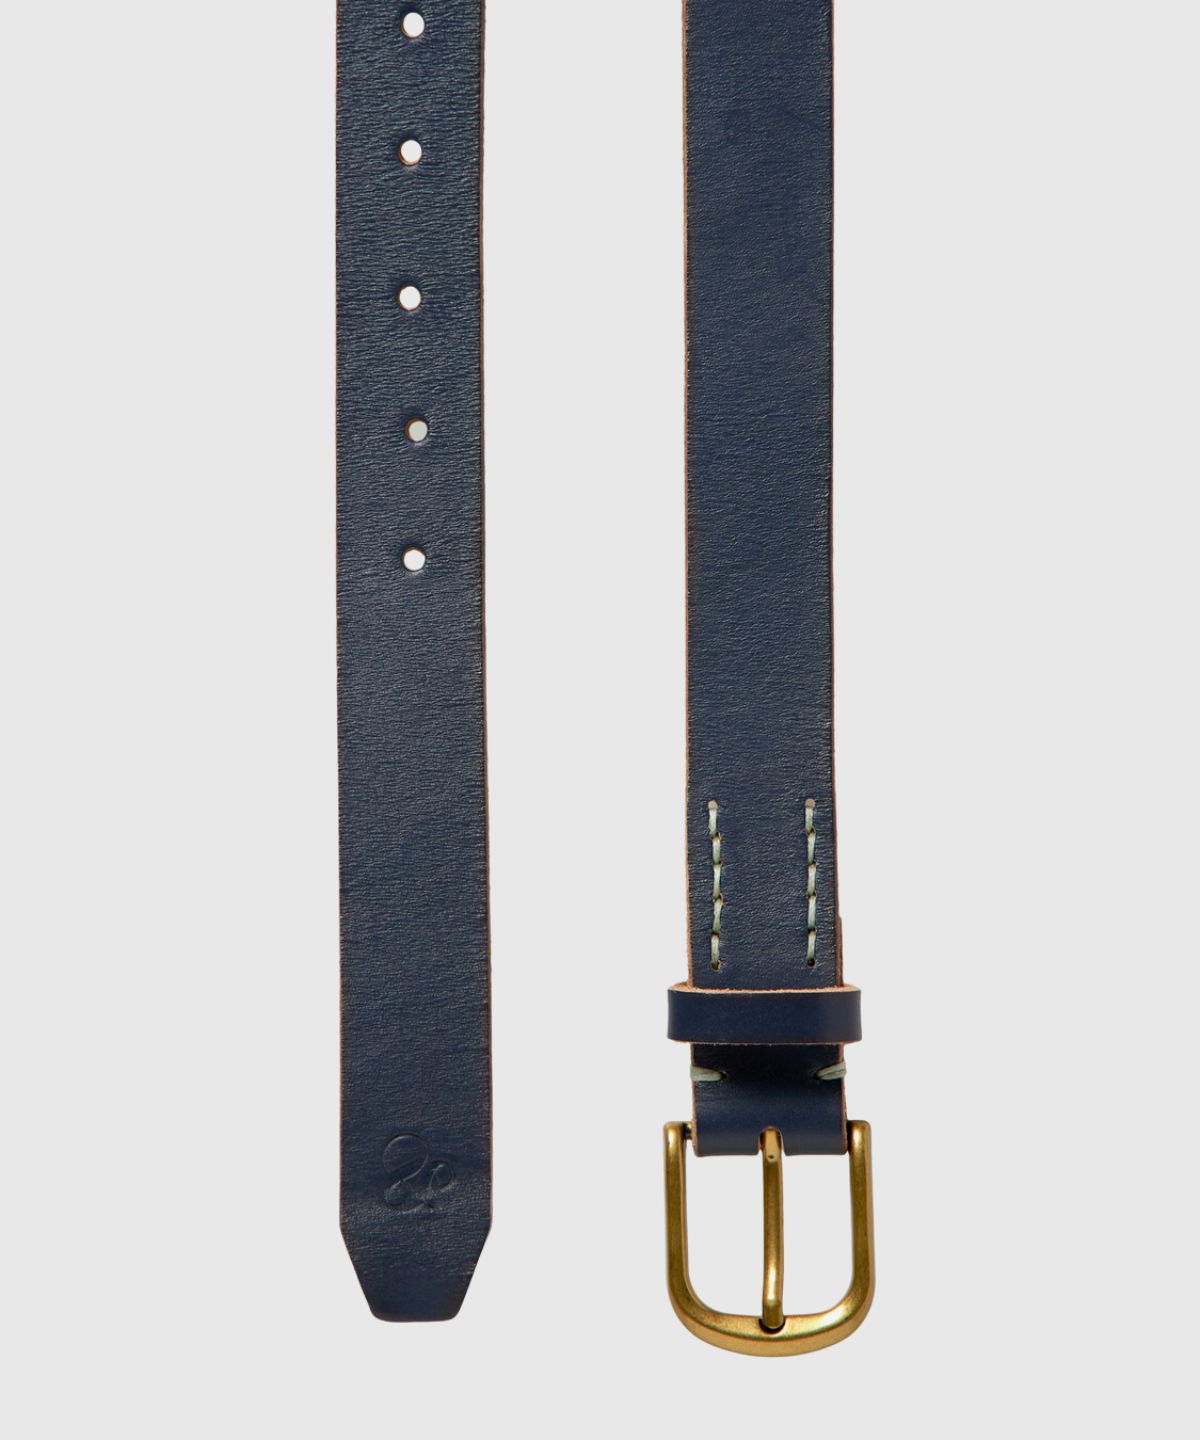 Leather belt with printed backside